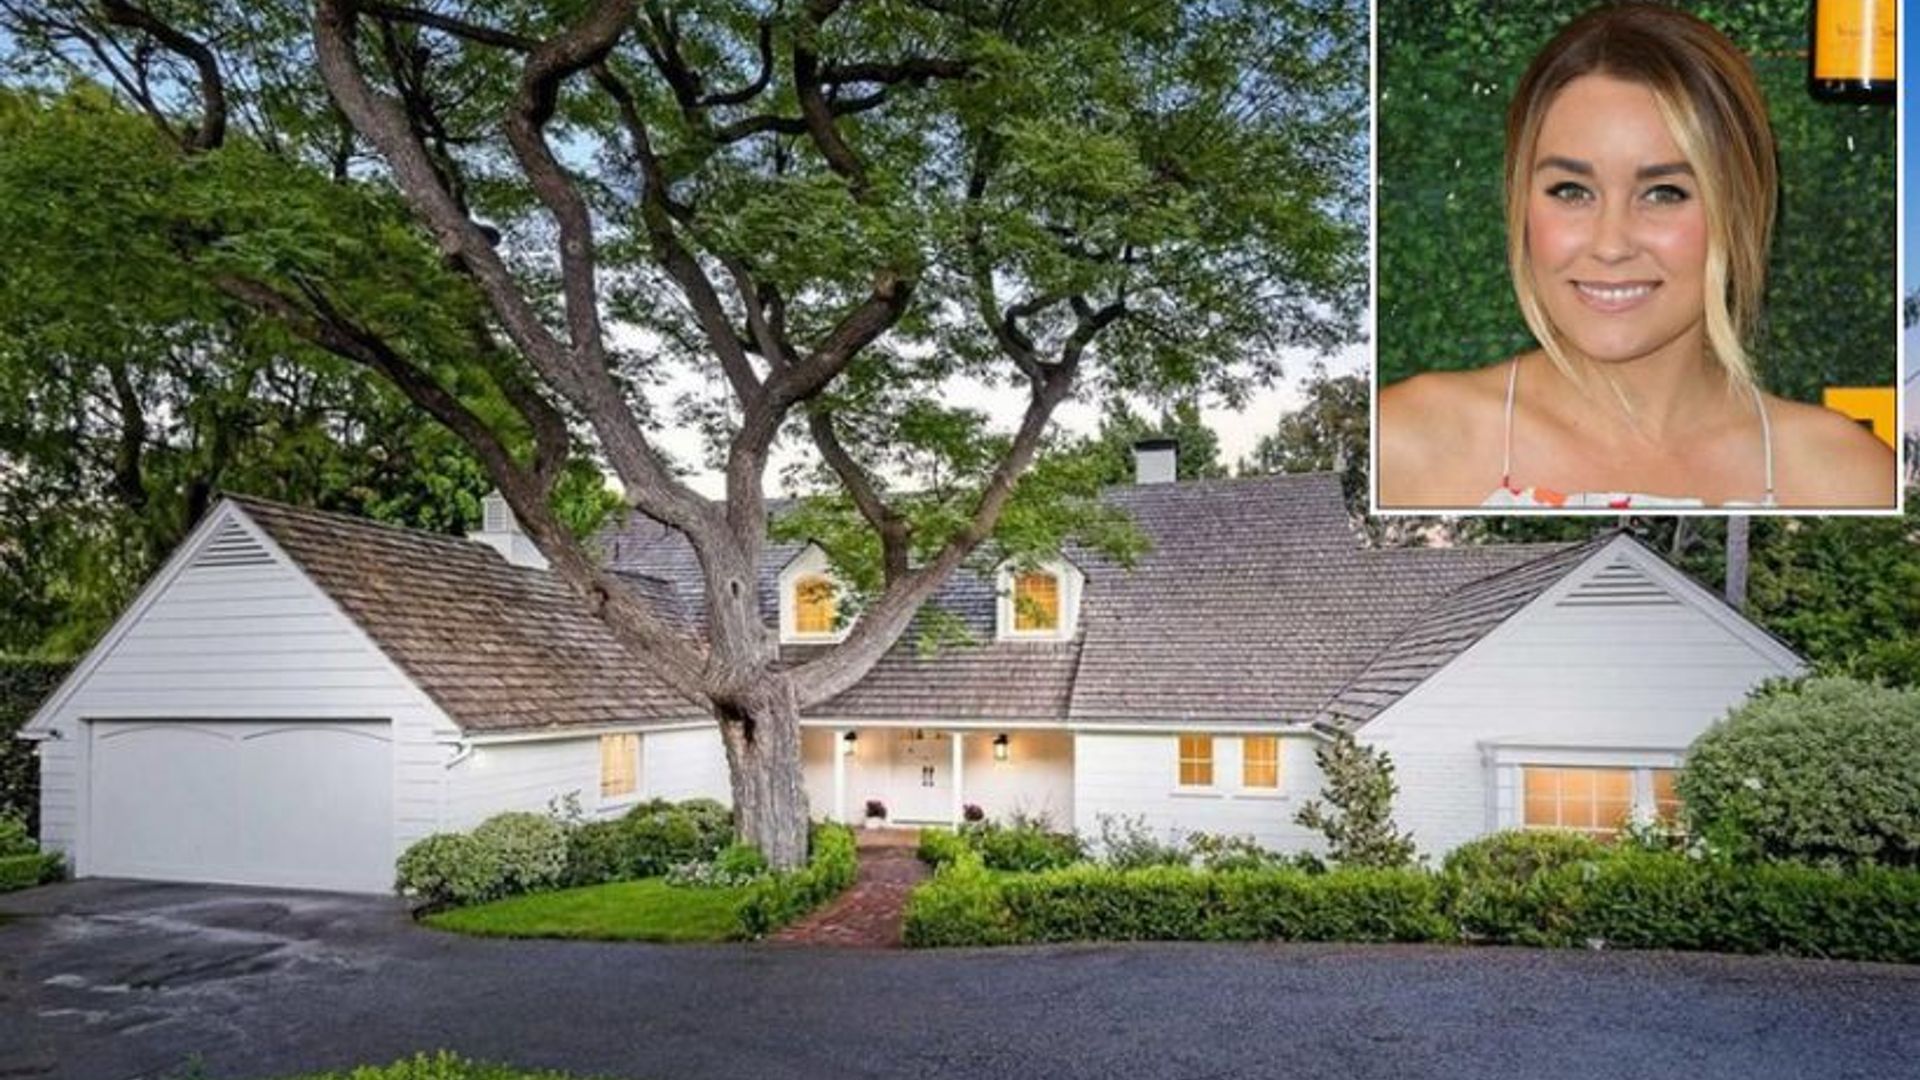 Lauren Conrad lists her beautiful LA home for £3.45million - take a look